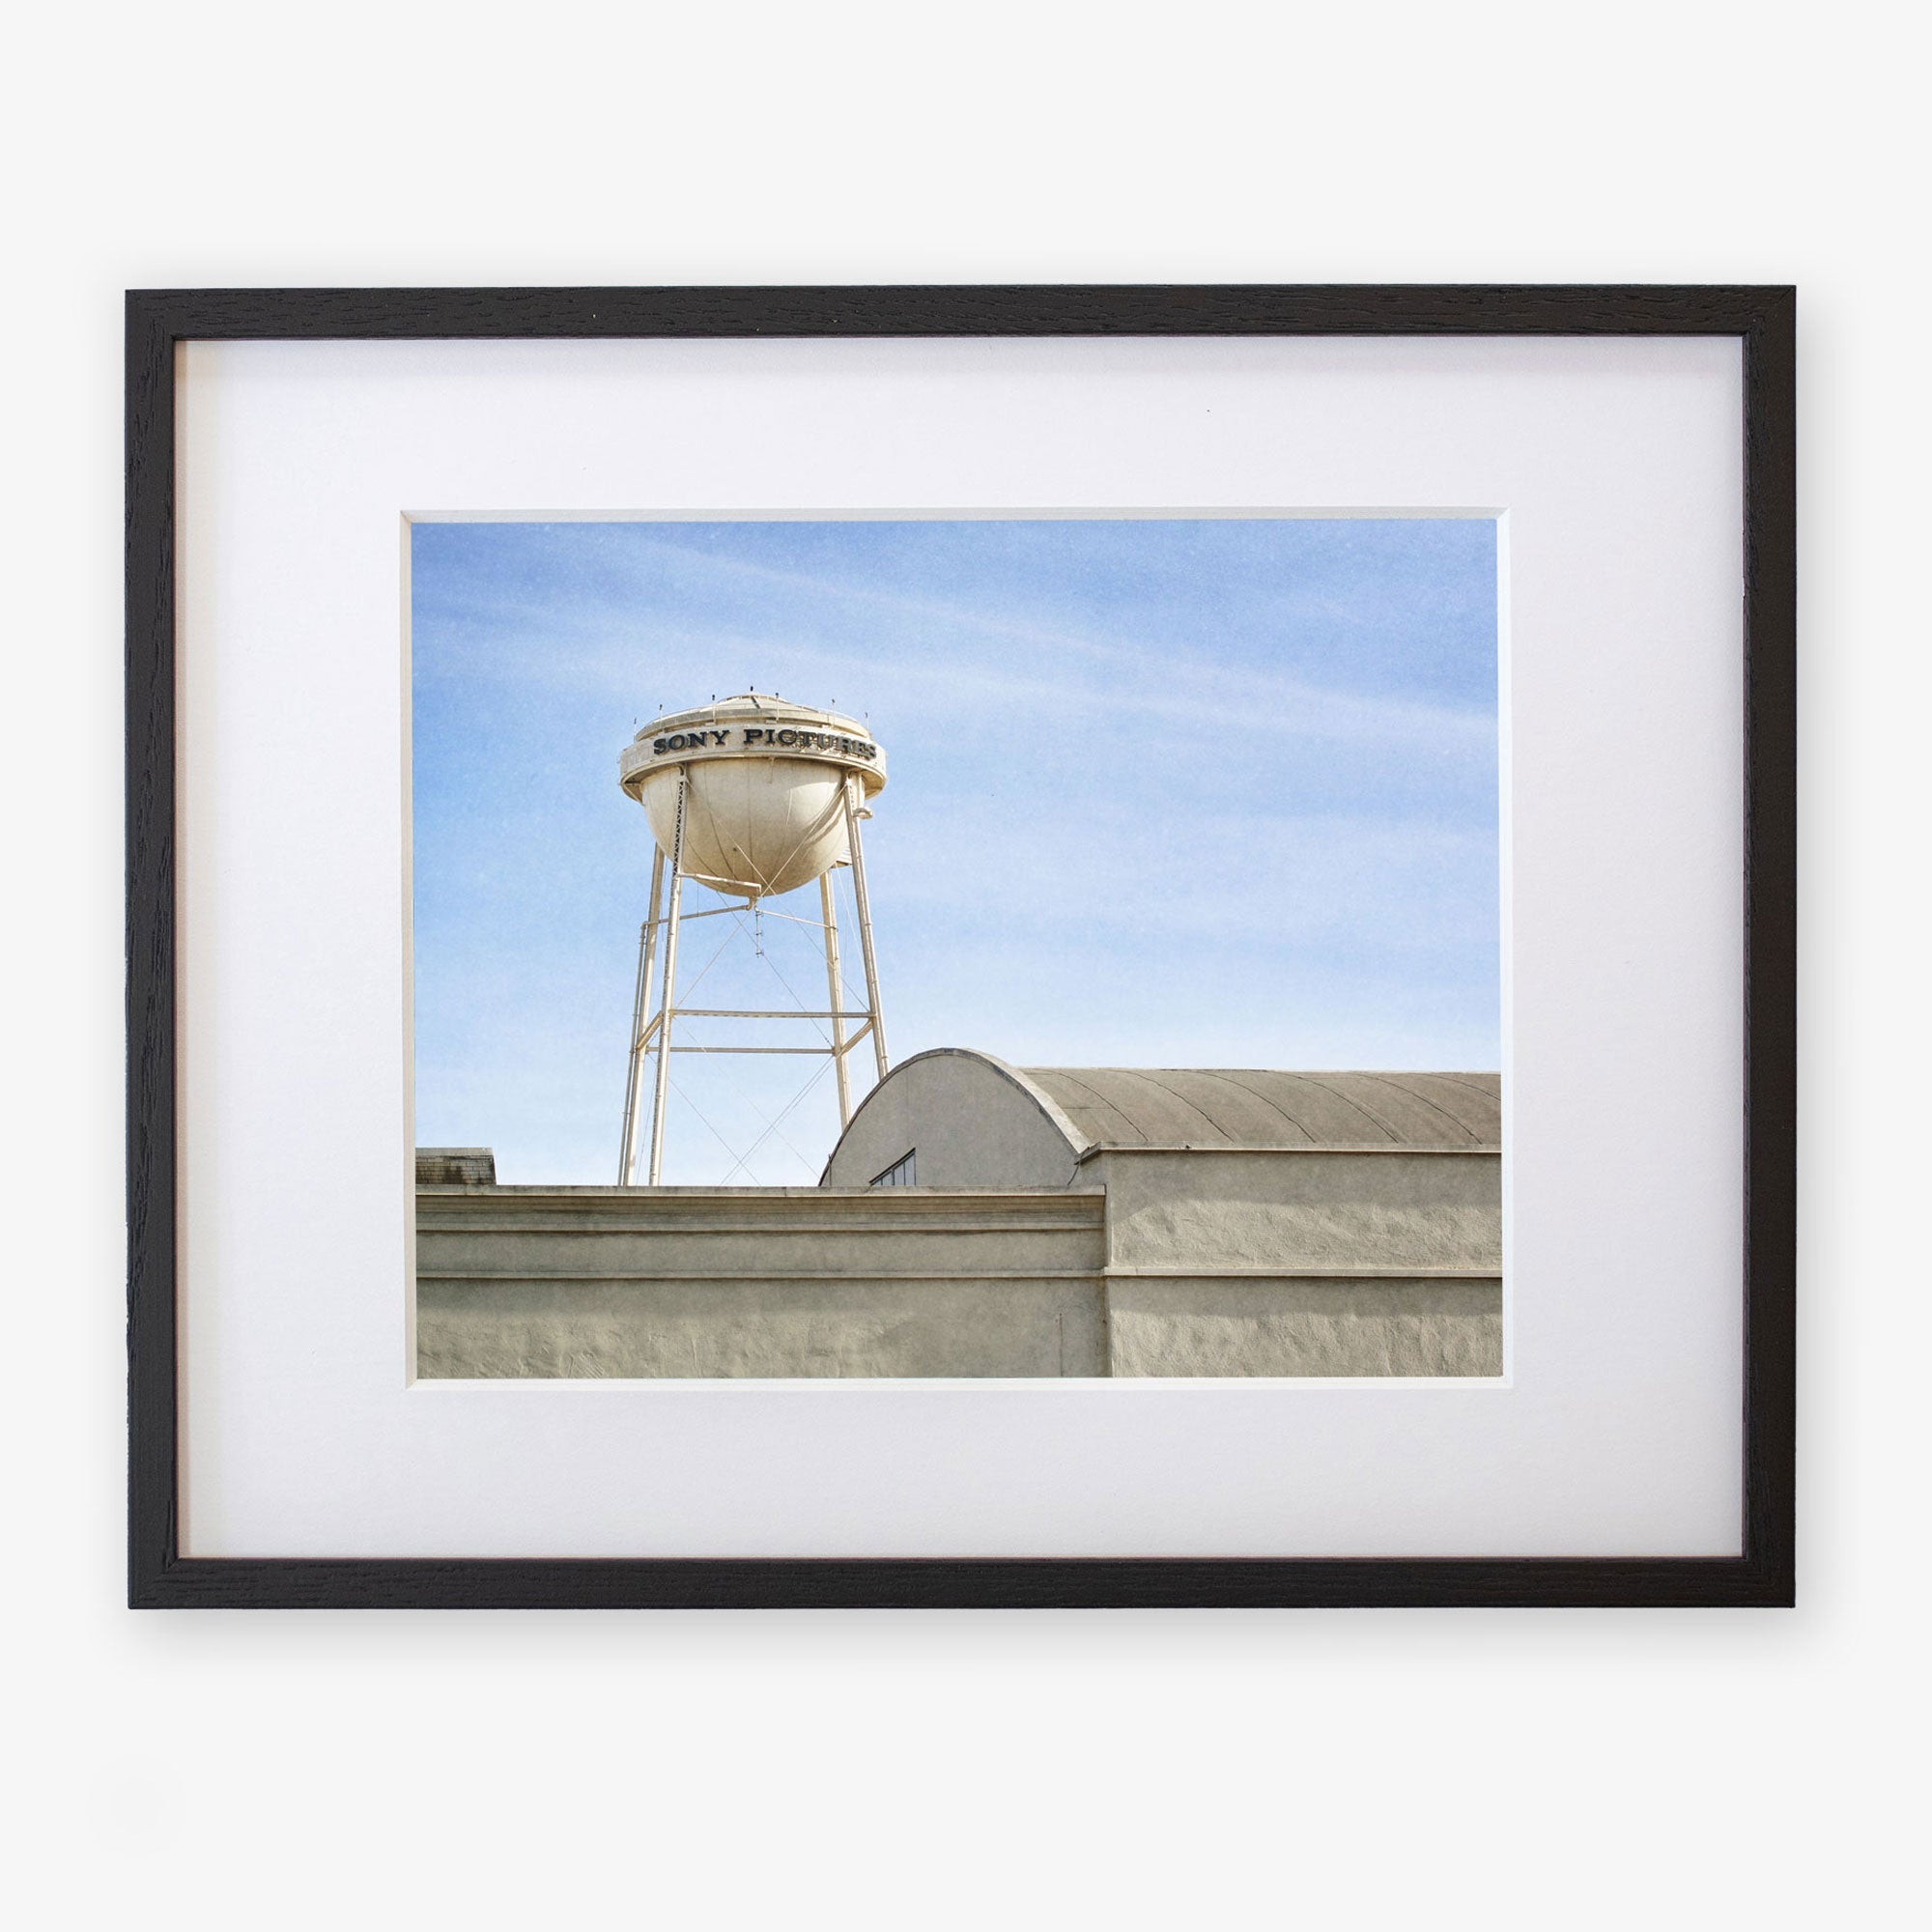 A framed Offley Green photograph on archival photographic paper of an industrial scene showing a water tower labeled “city property” above warehouse roofs under a clear blue sky.